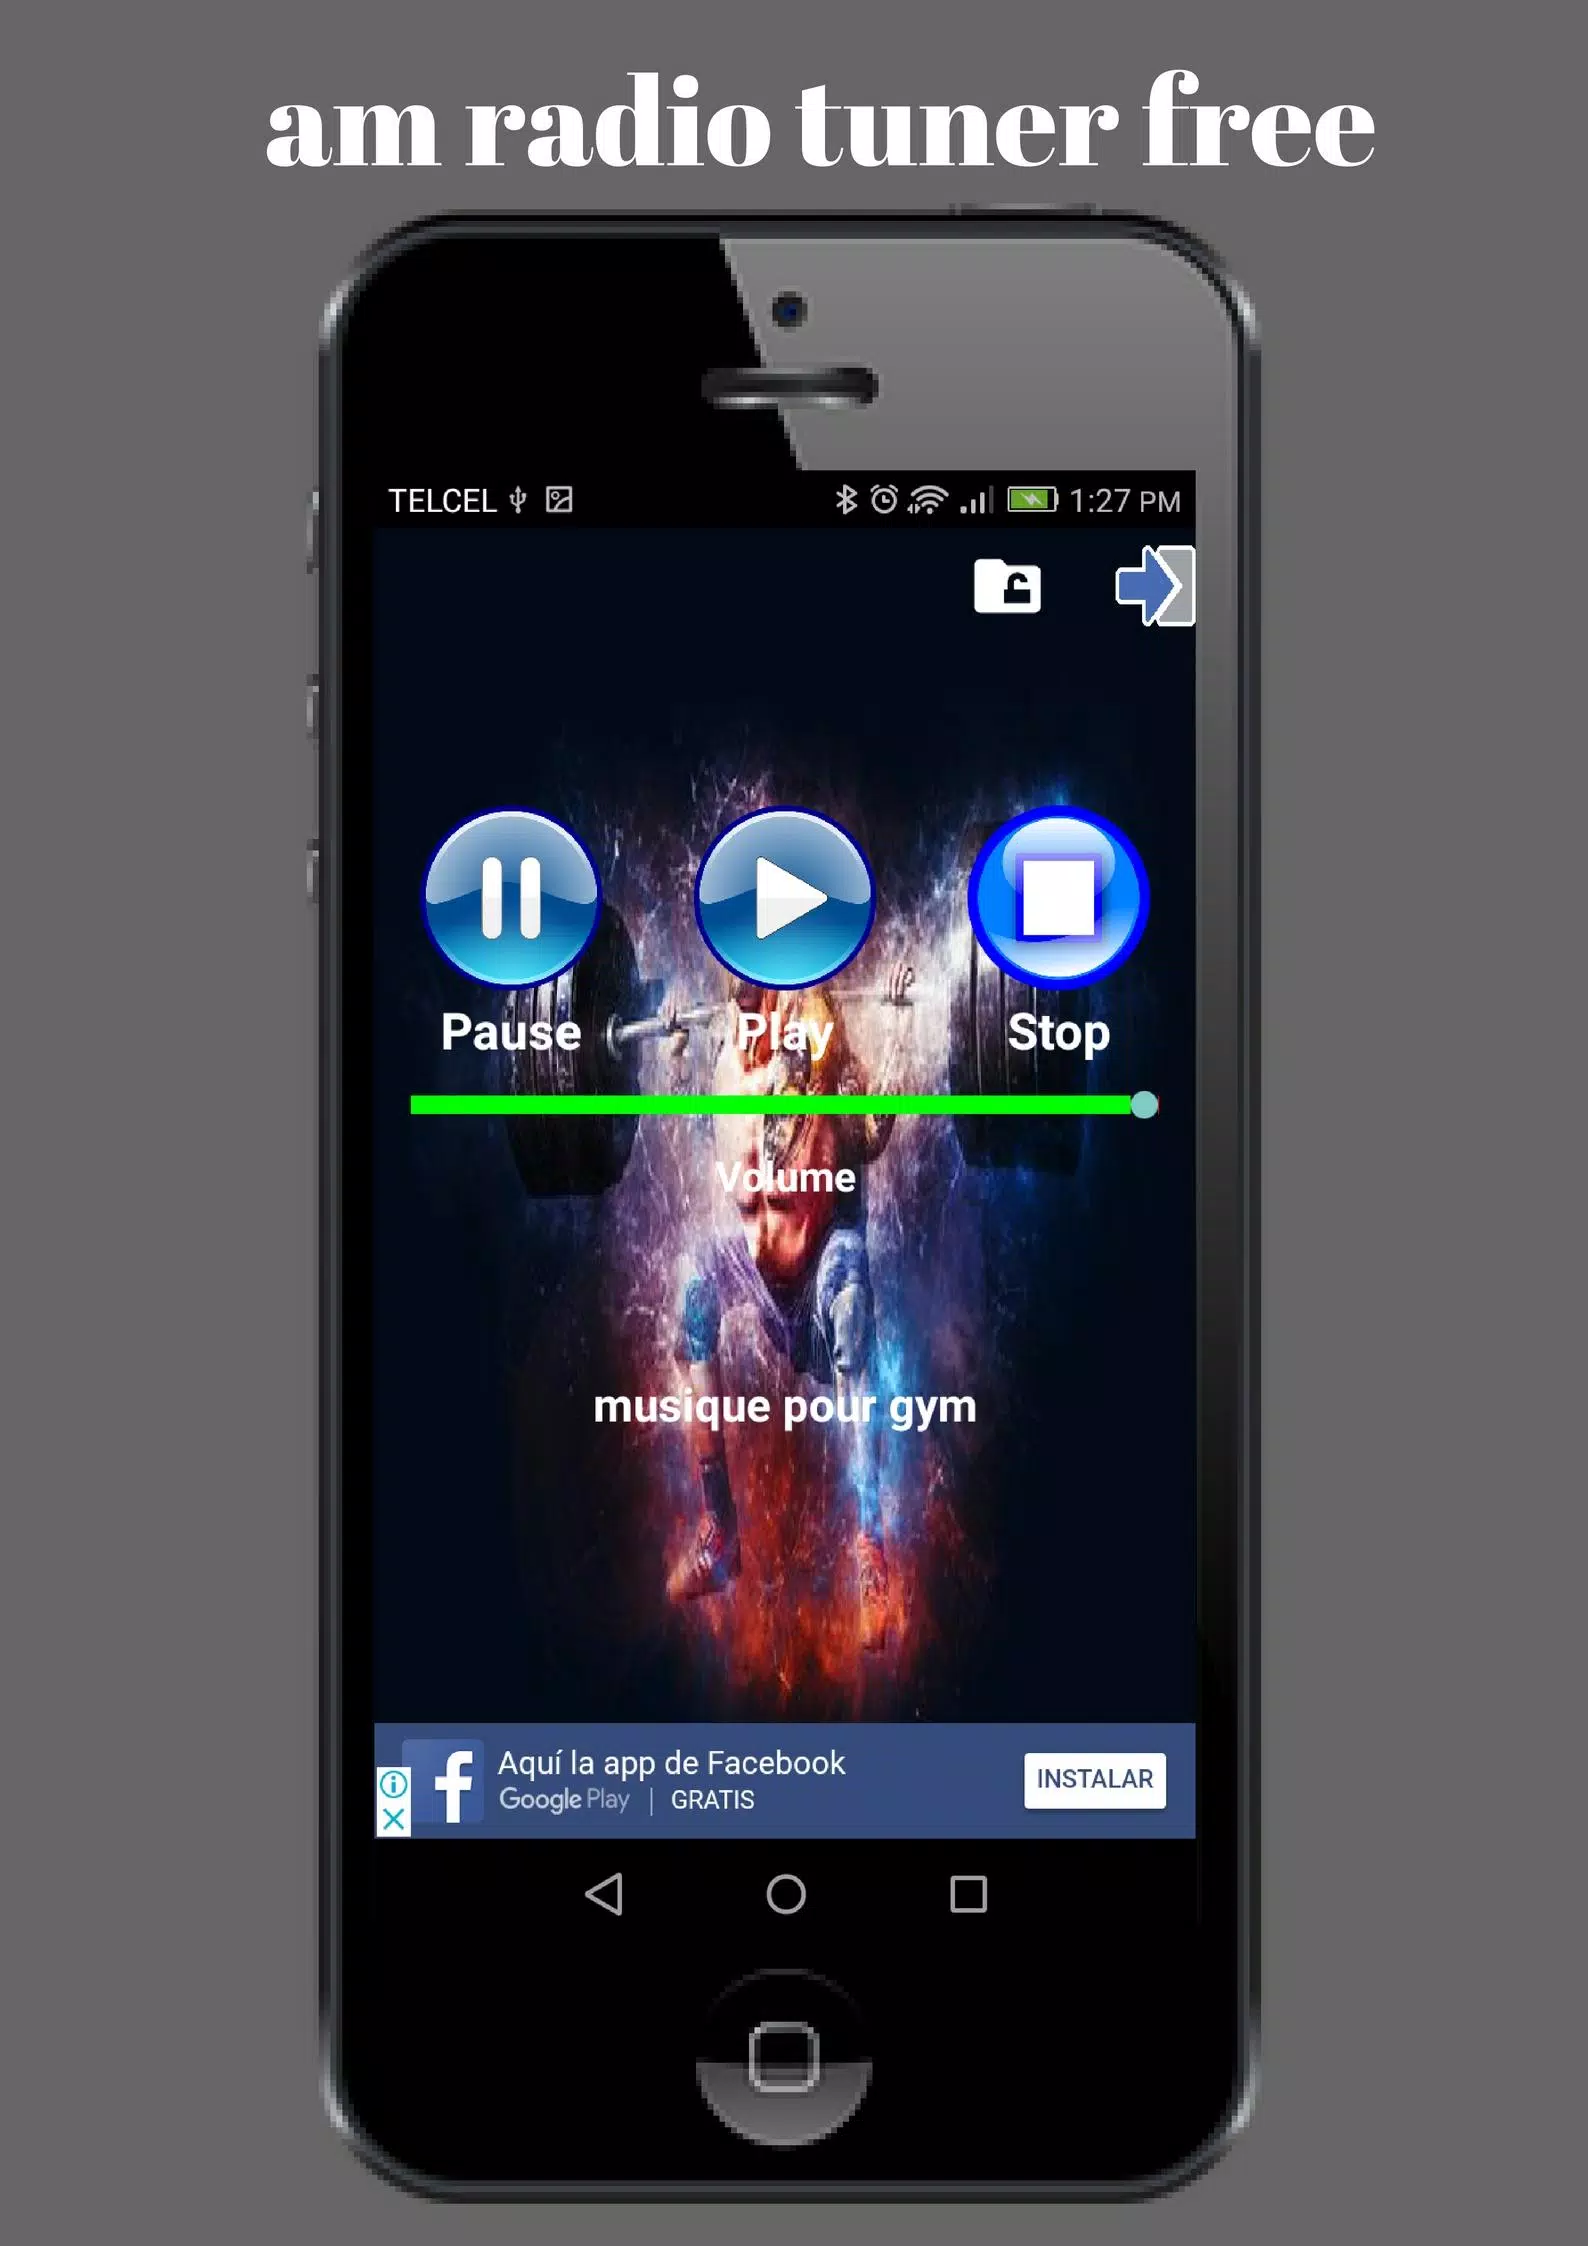 am radio tuner for Android - APK Download